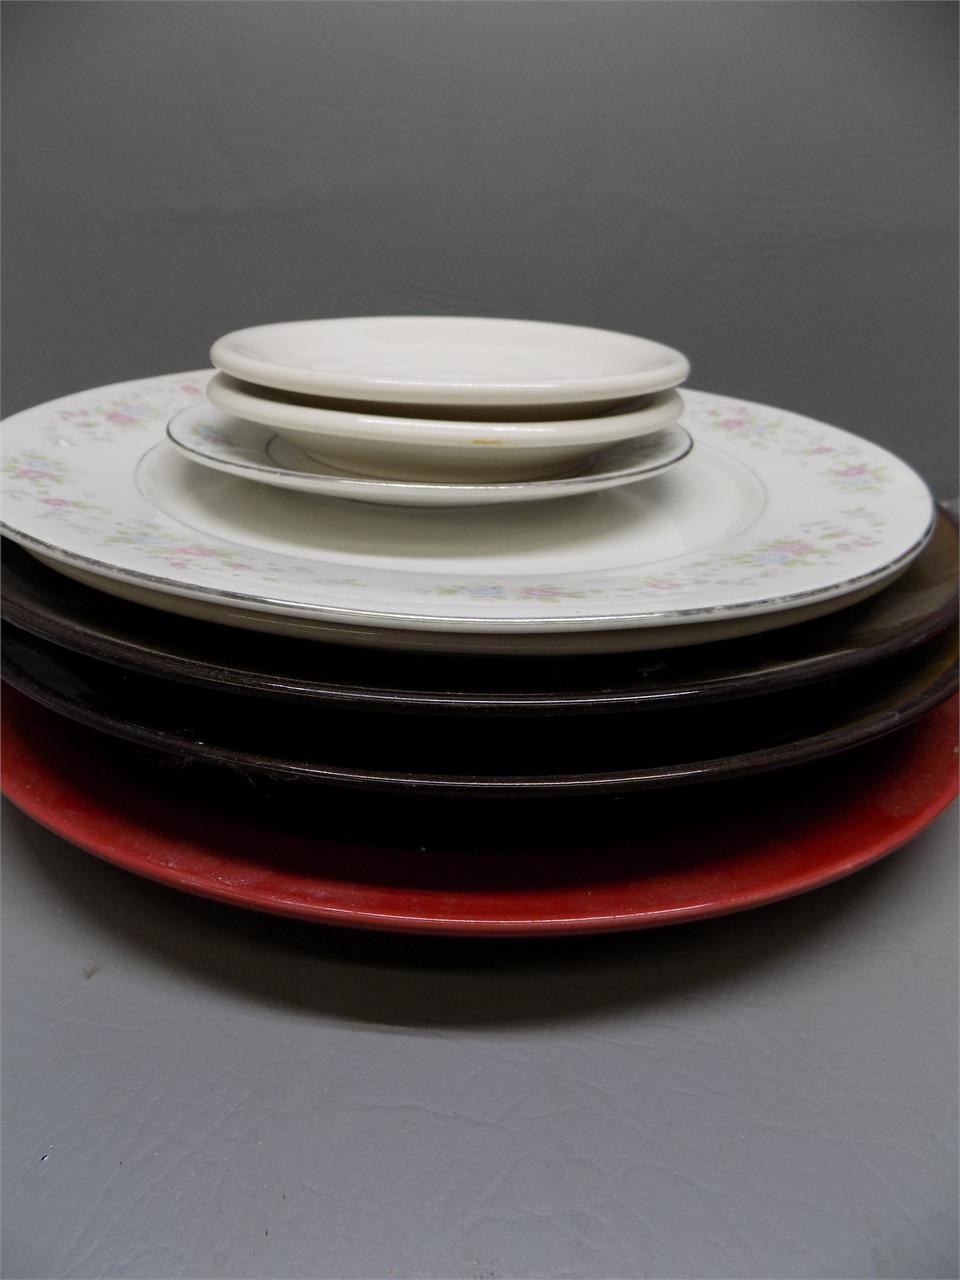 Kitchen Plates and Bakeware